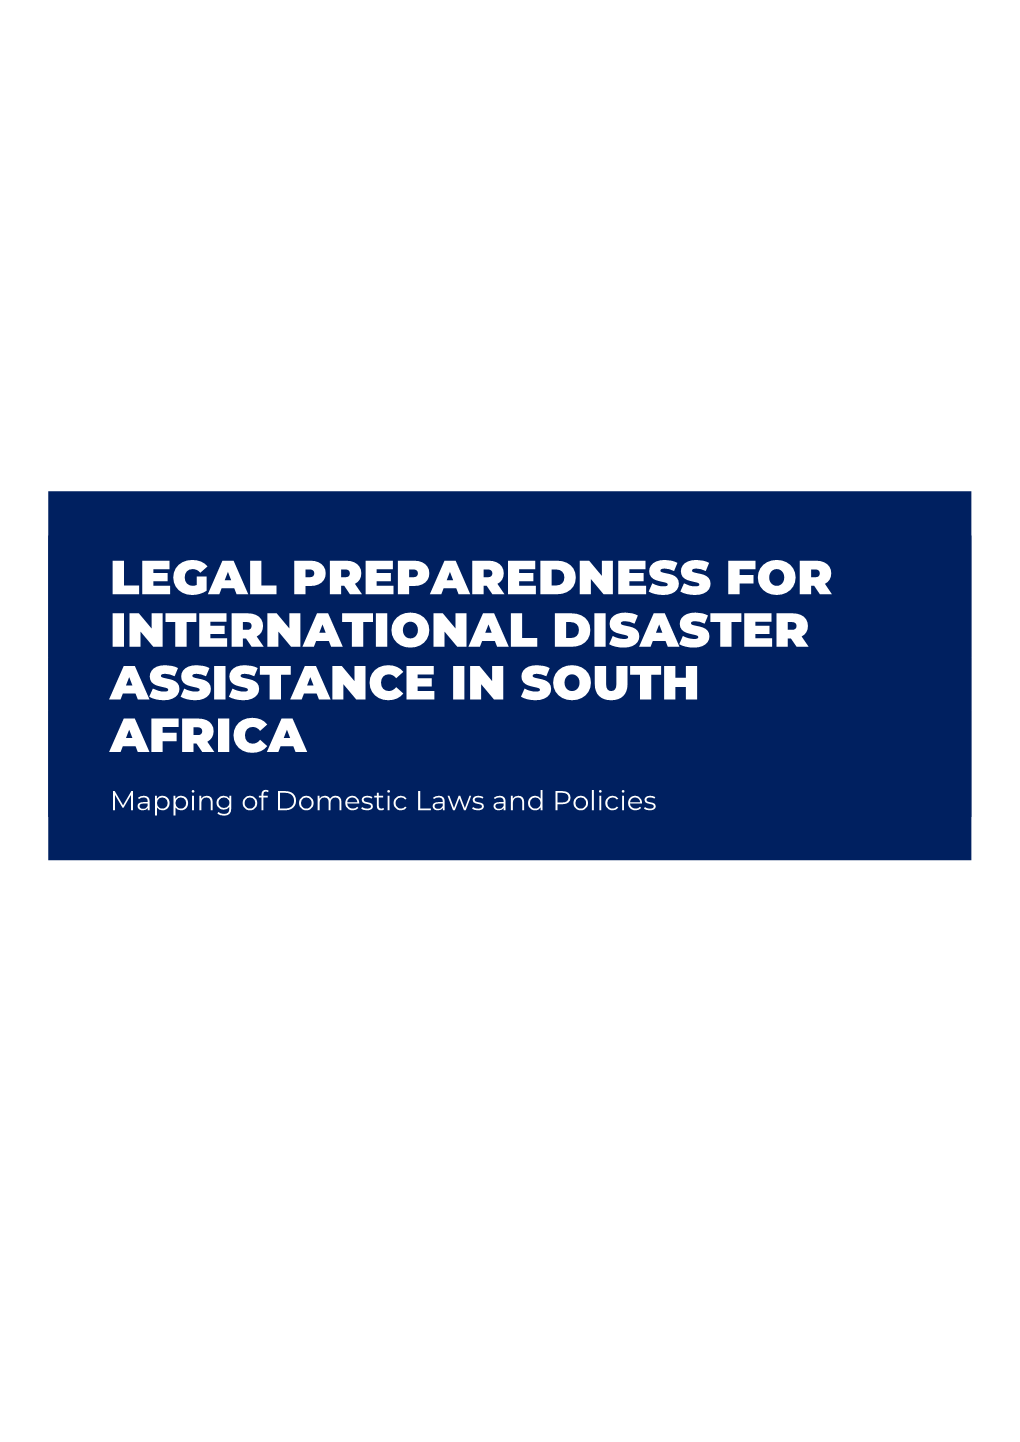 Legal Preparedness for International Disaster Assistance in South